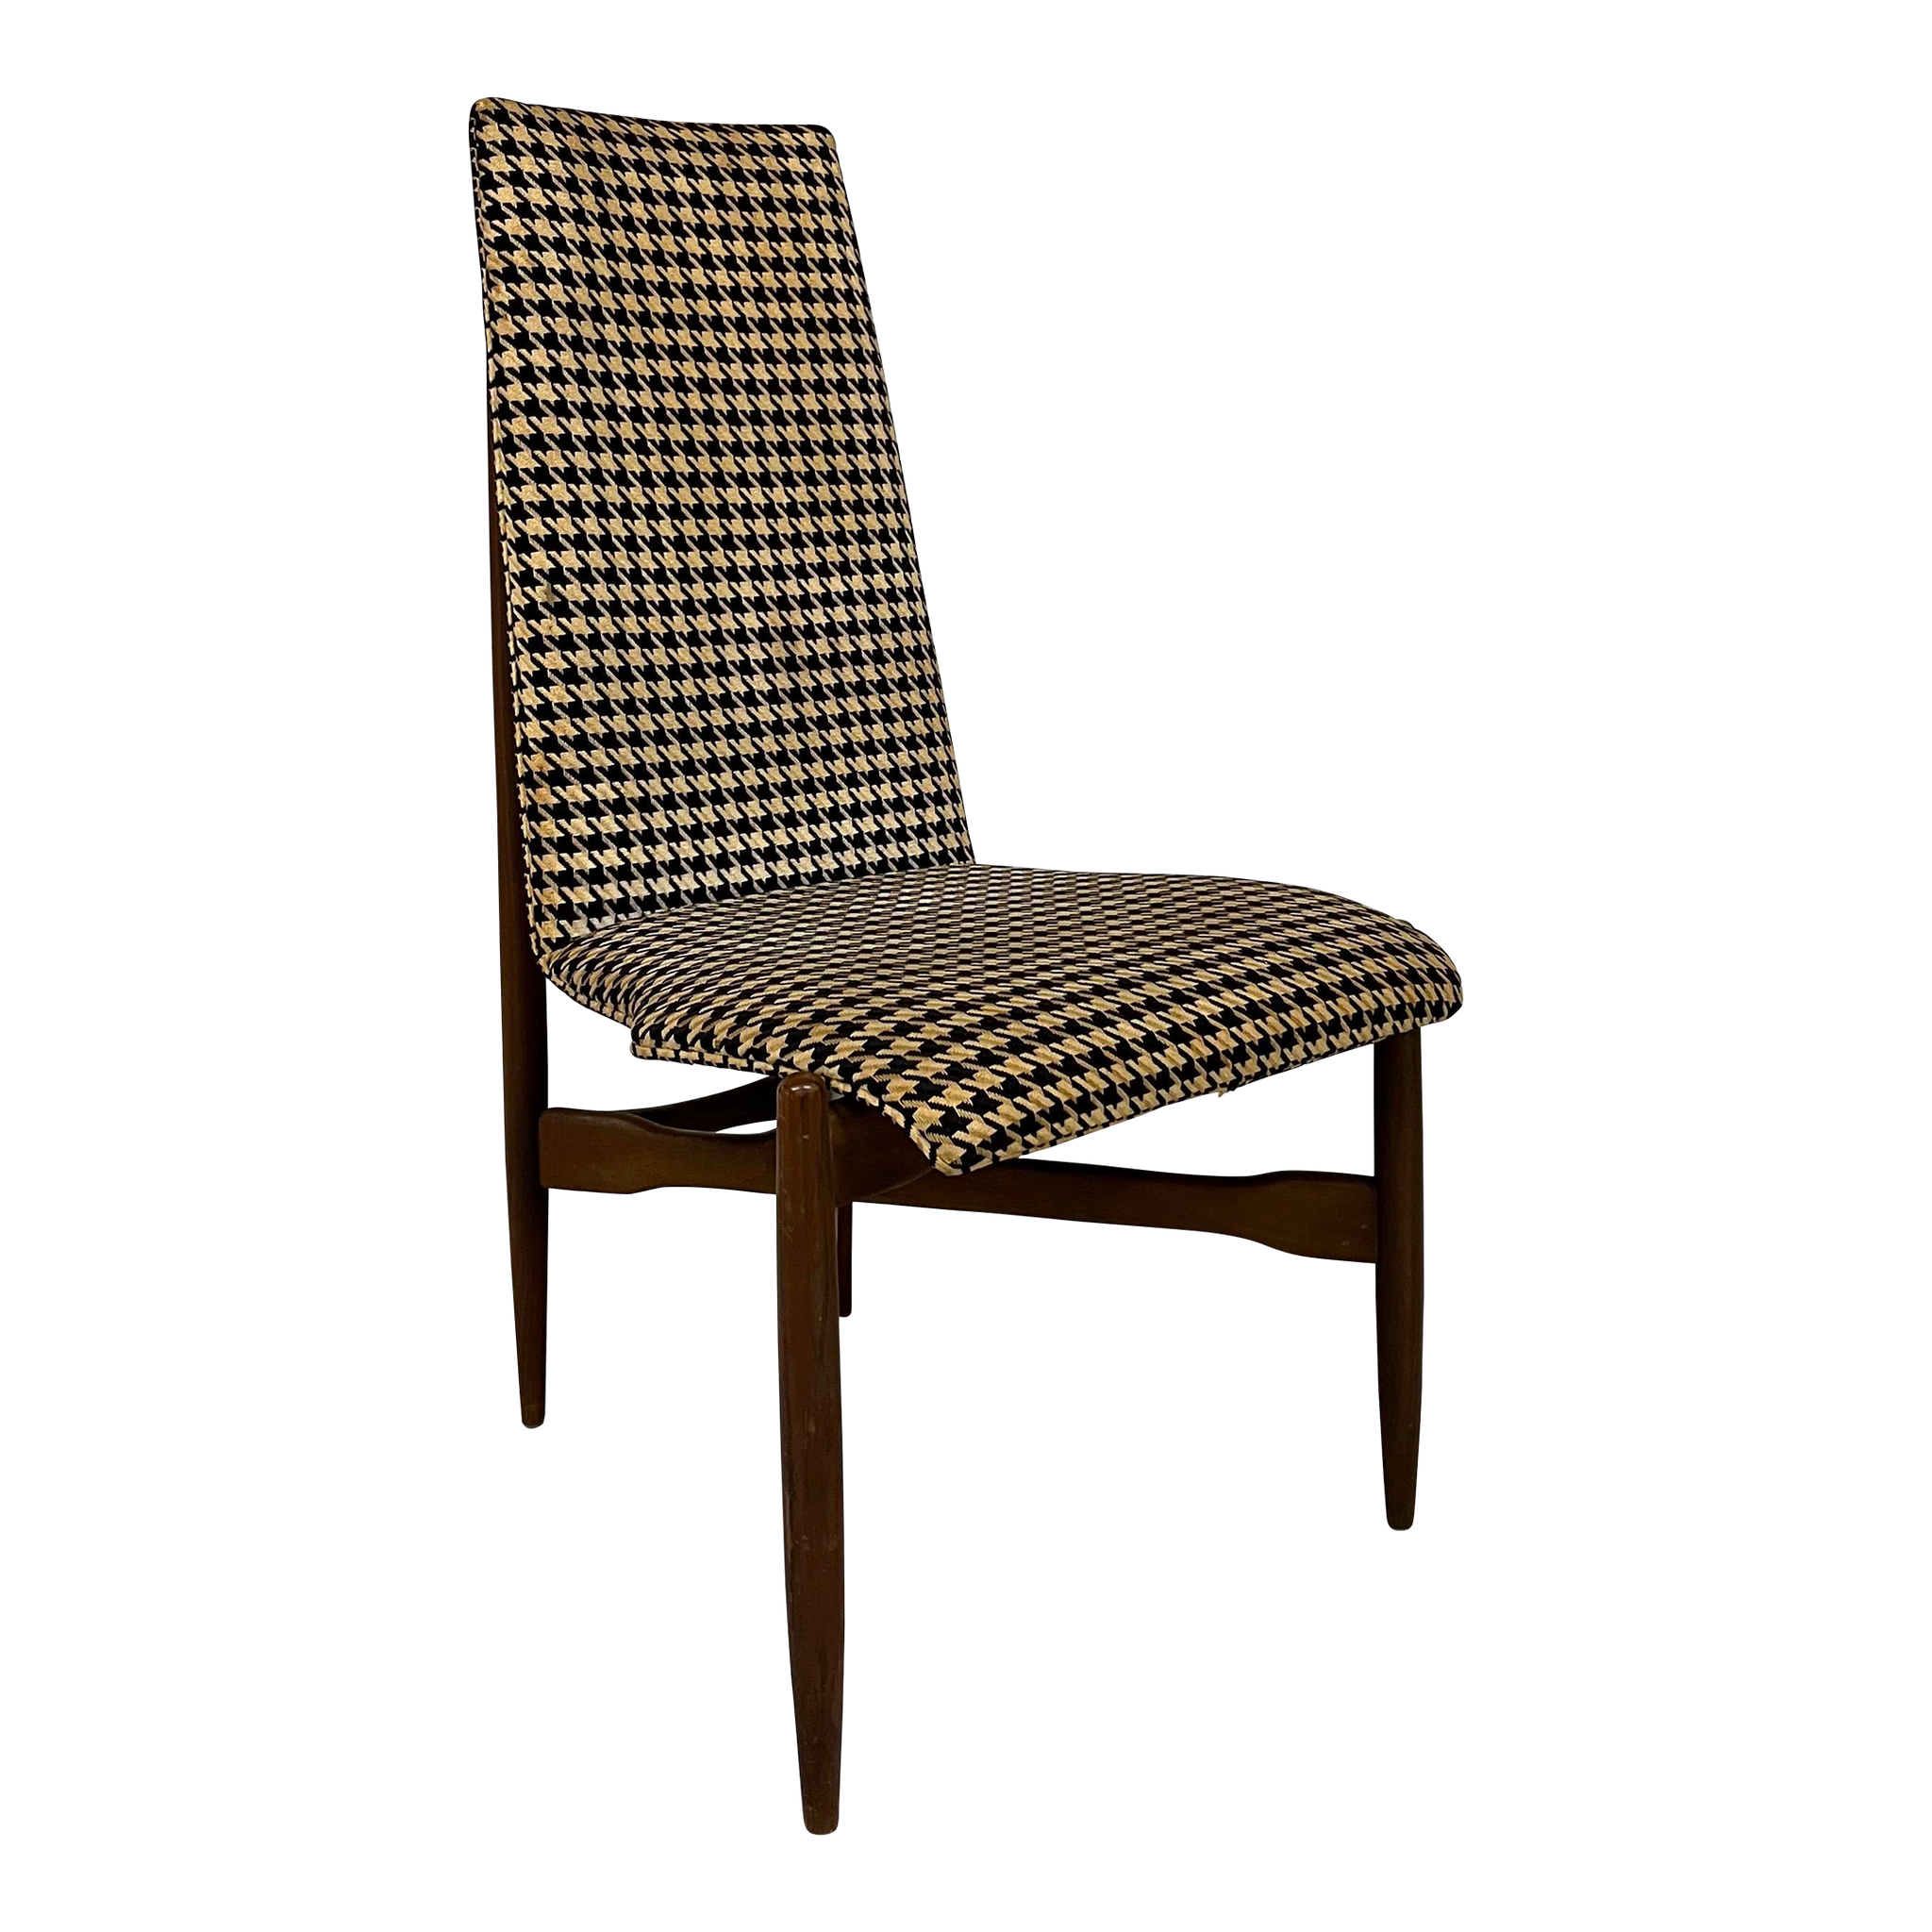 60s Houndstooth Chair by Kodawood